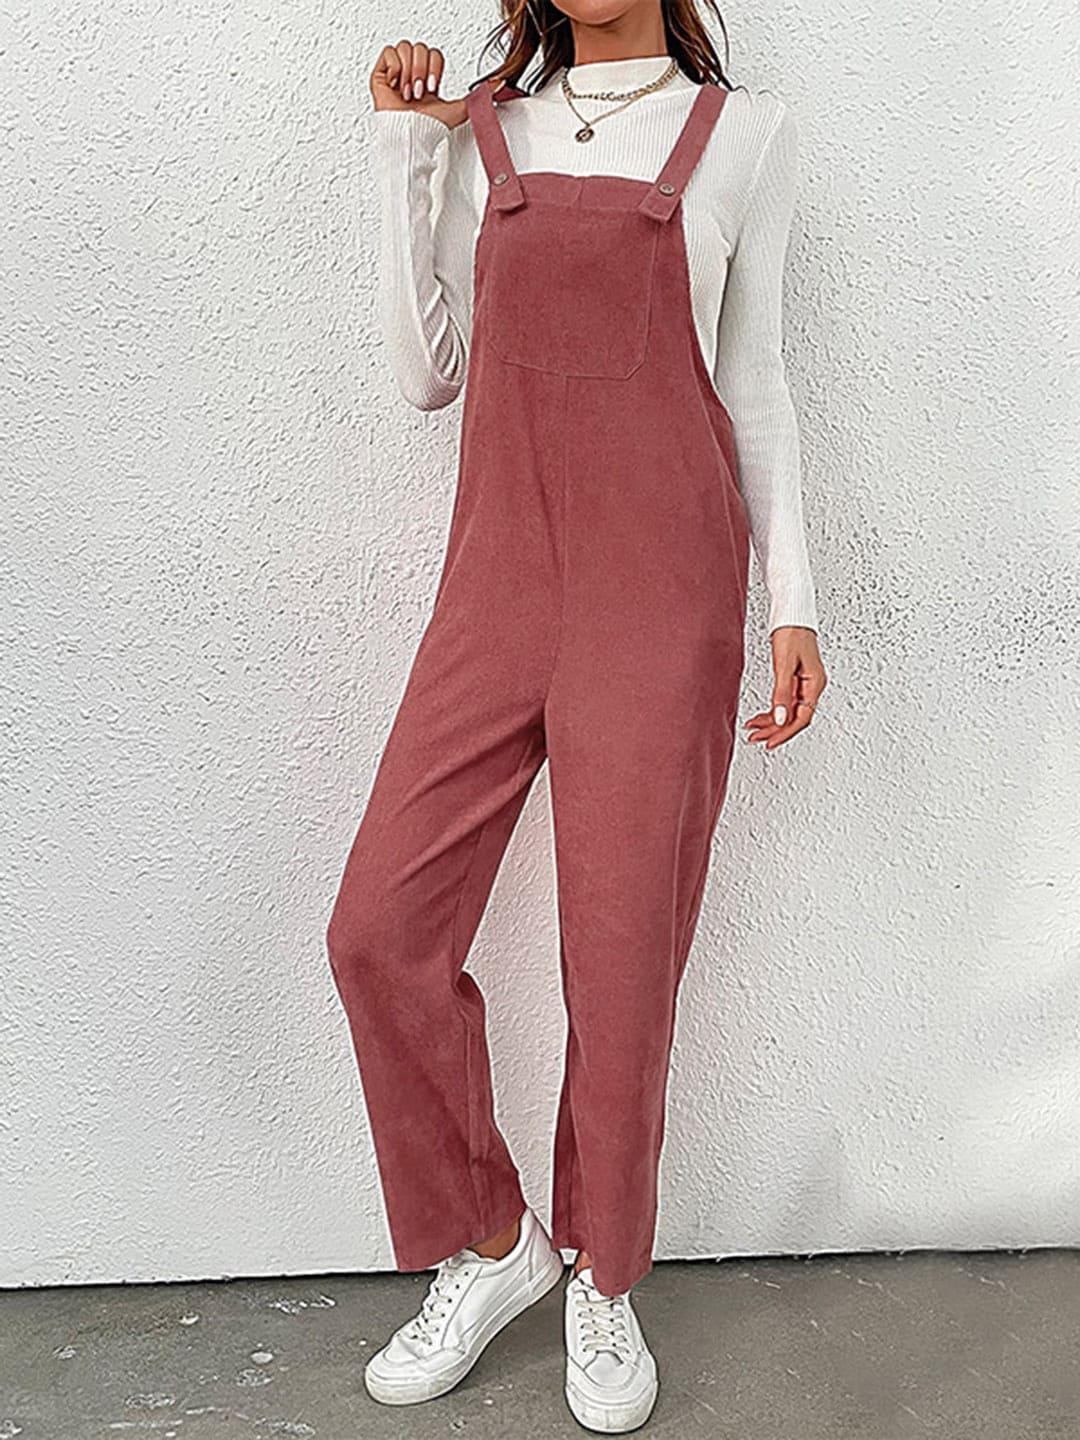 stylecast red shoulder strap straight leg dungaree